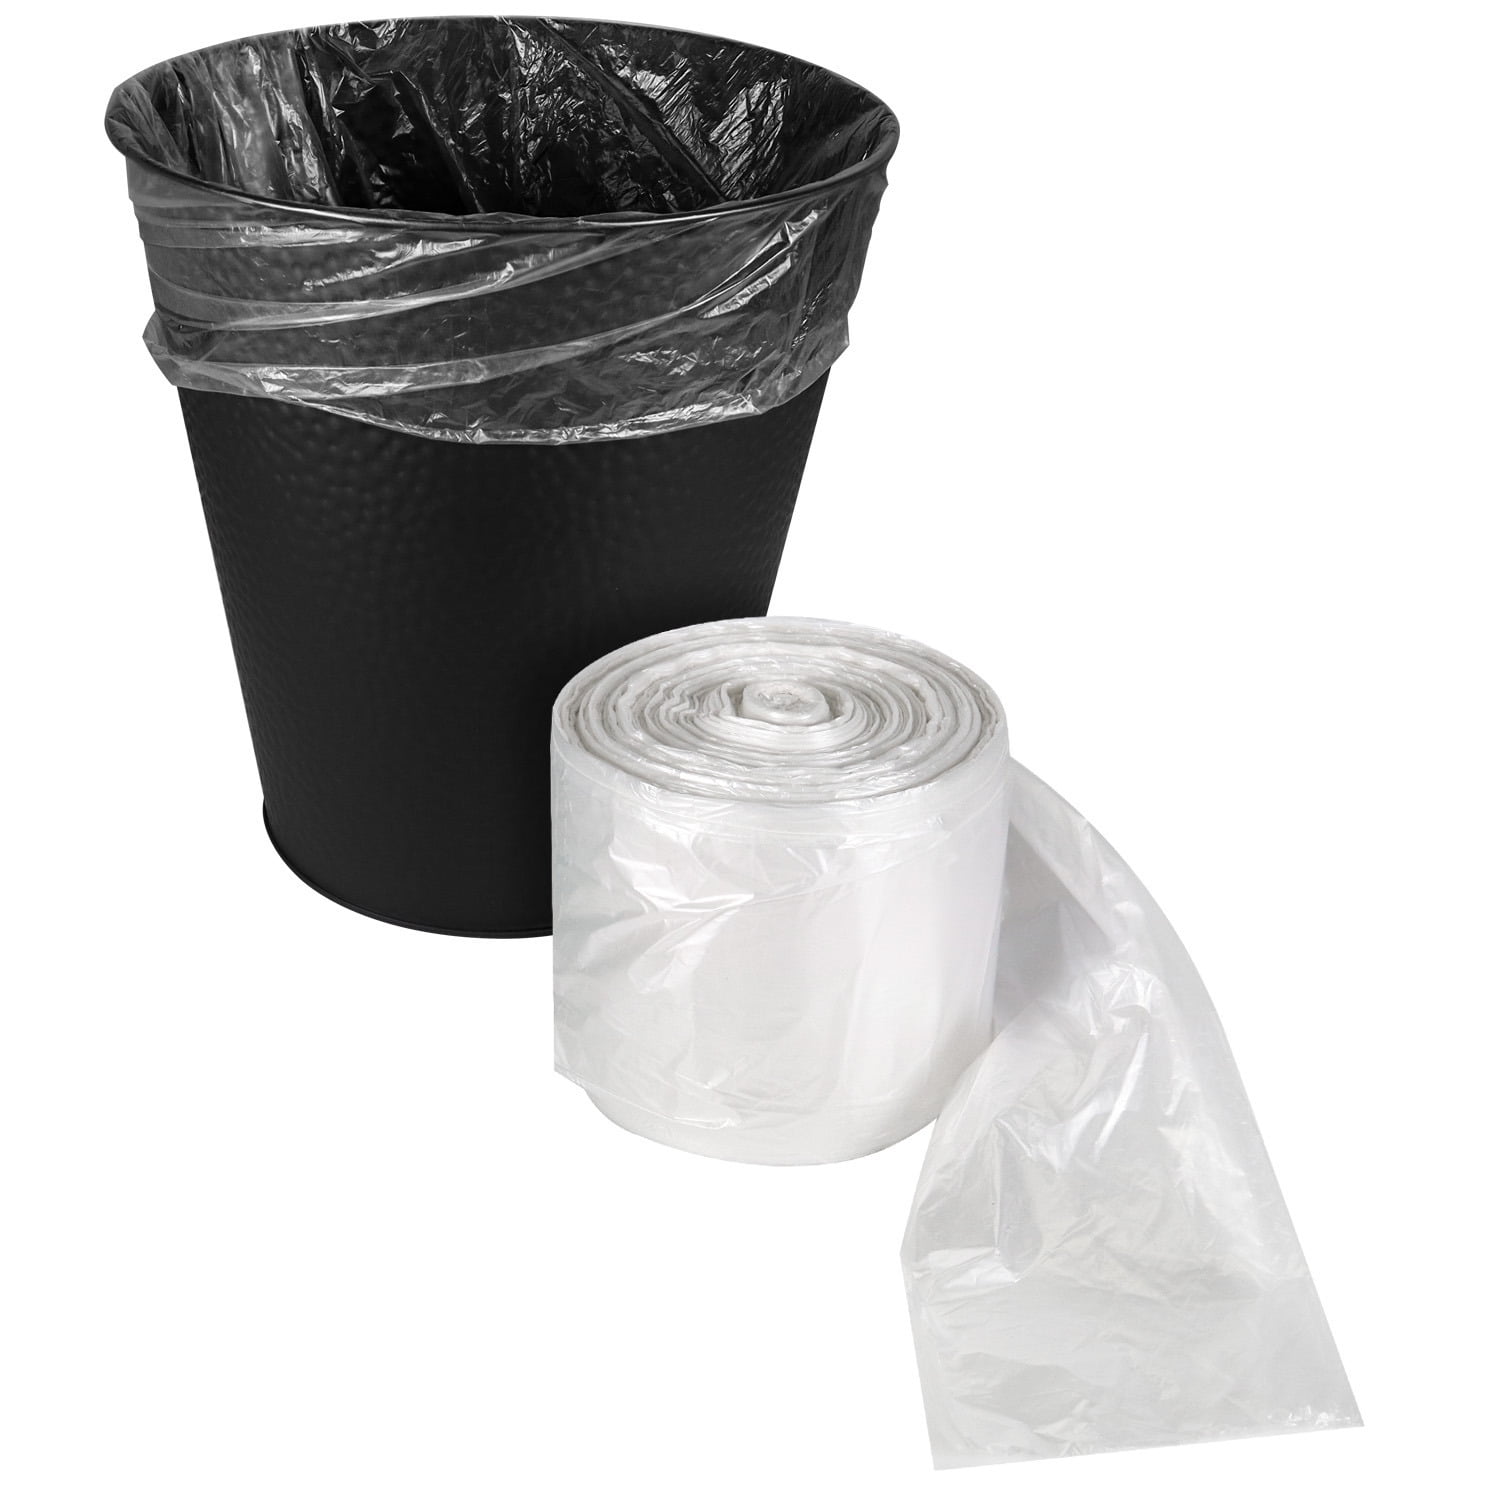 Small Trash Bag, 2.6 Gallon Garbage Bags Bathroom Trash can Liners for  Bedroom Home Kitchen 80 Counts,2 Gallon Trash Bag with Blue Drawstring,  White